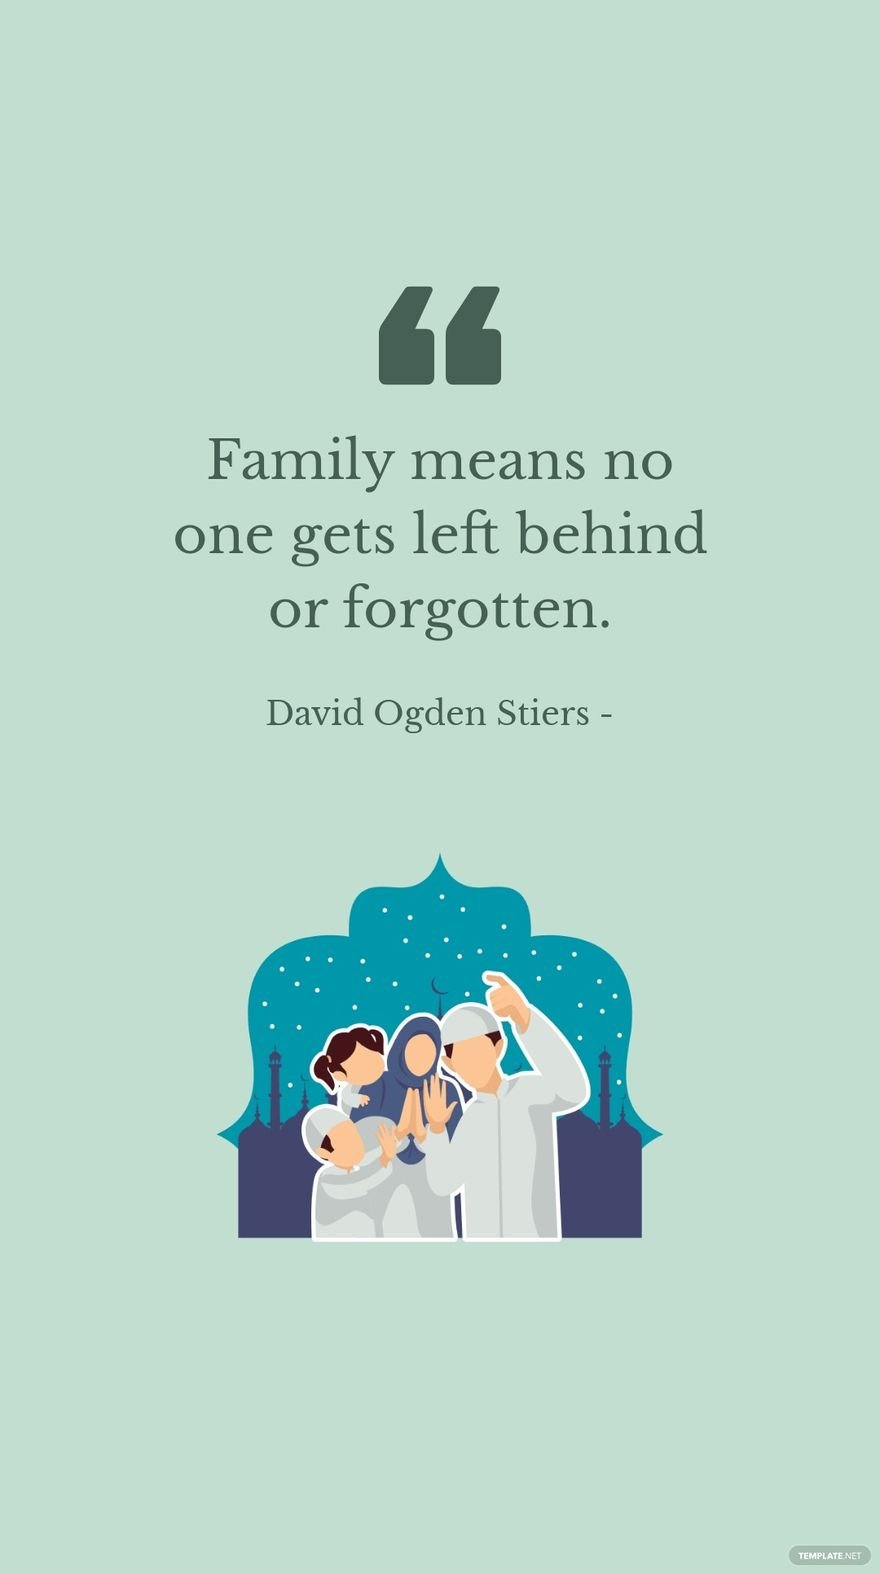 Free David Ogden Stiers - Family means no one gets left behind or forgotten.